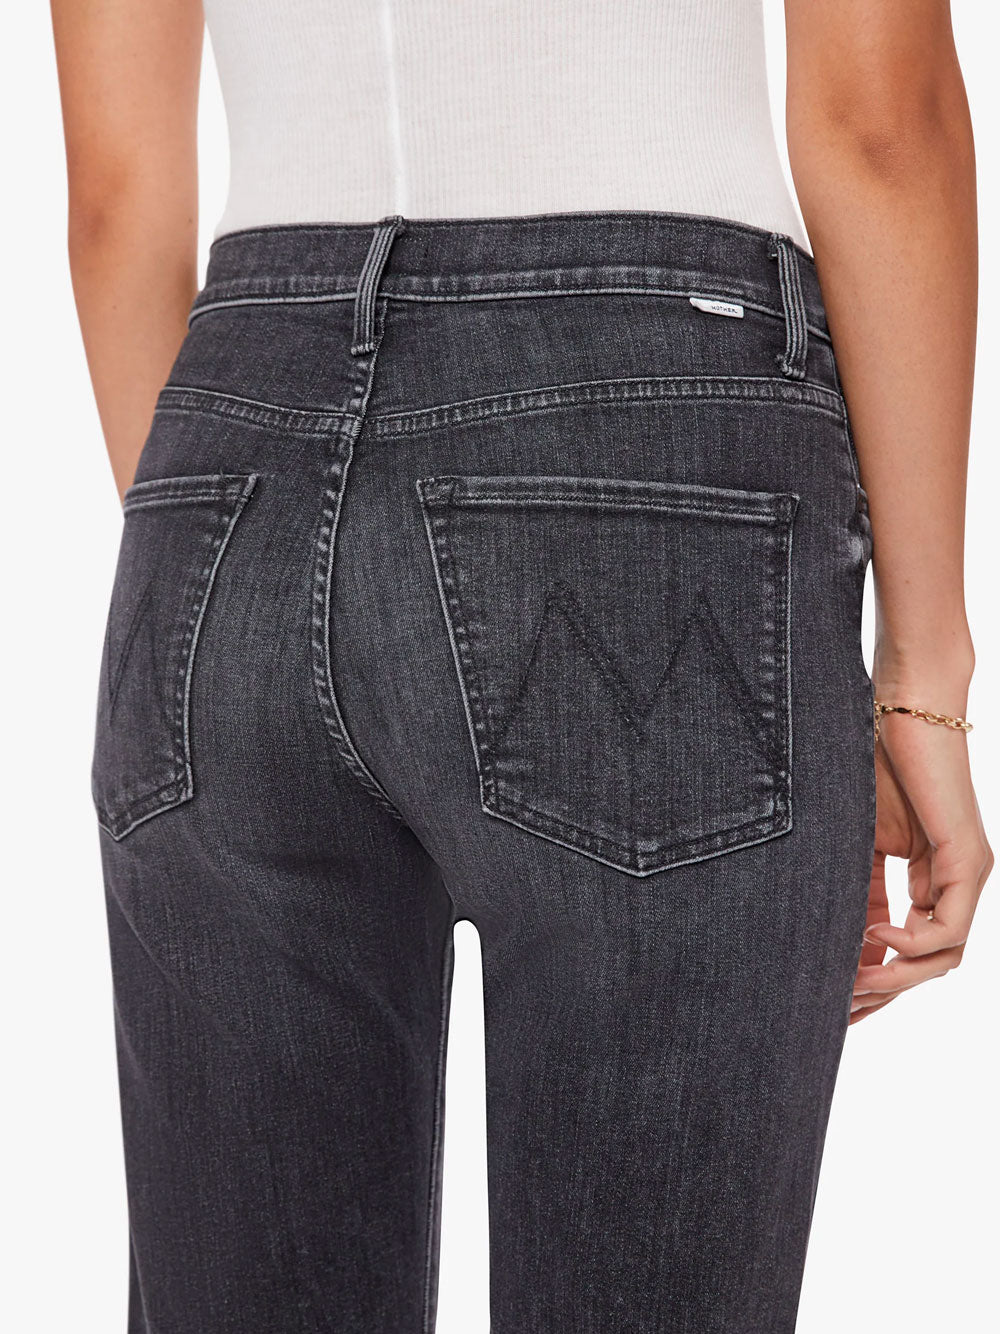 The Half Pipe Ankle Jeans